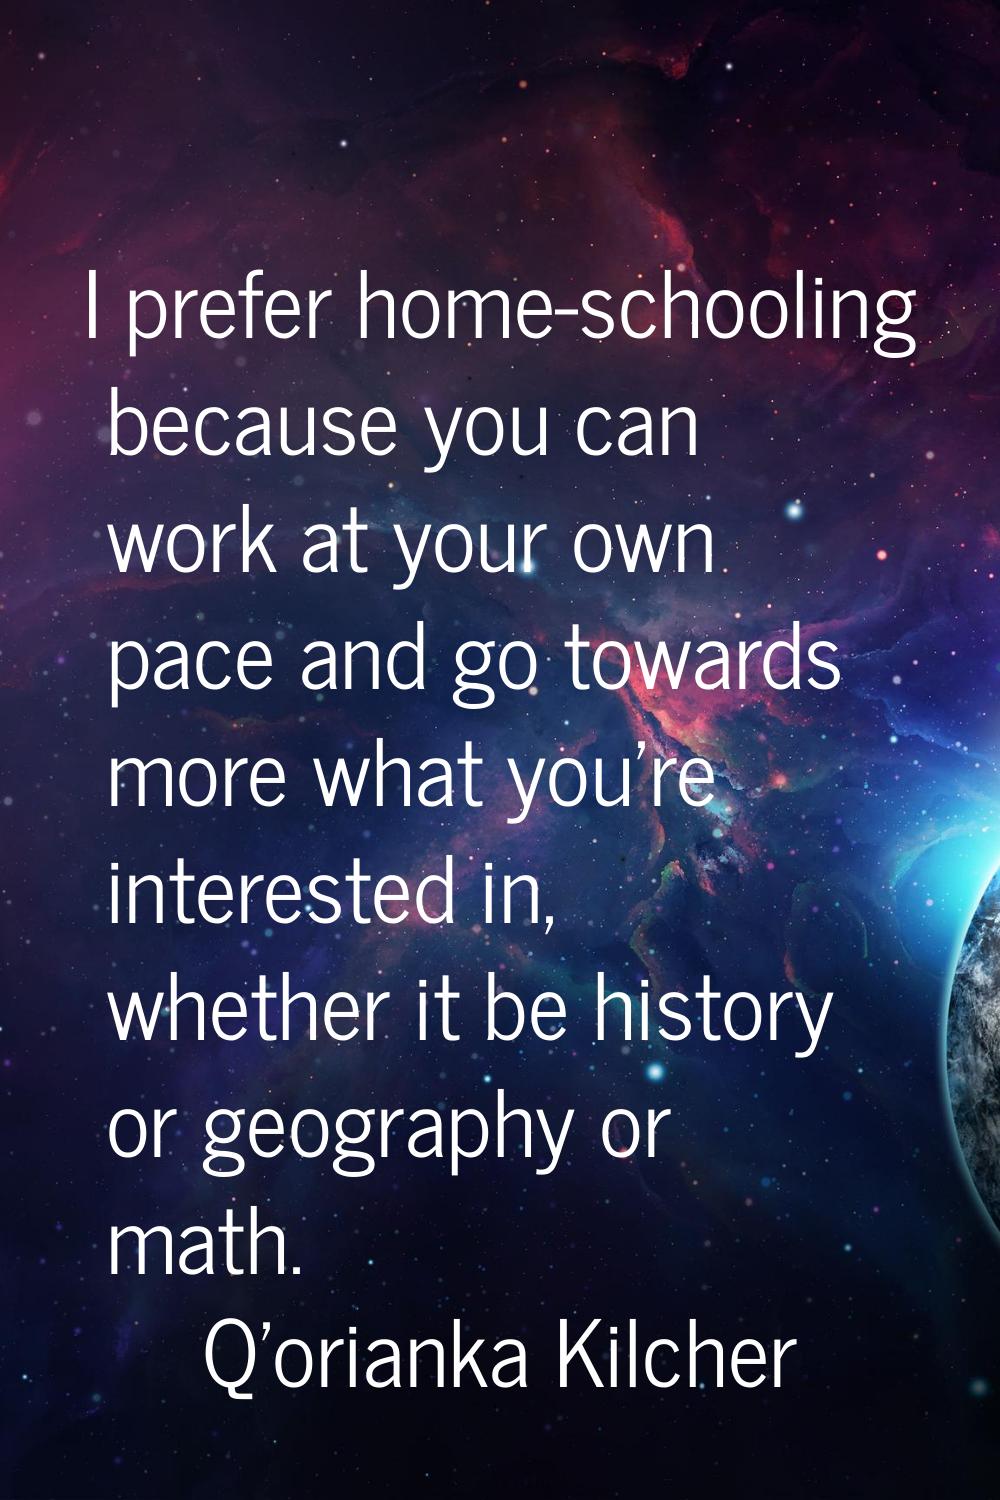 I prefer home-schooling because you can work at your own pace and go towards more what you're inter